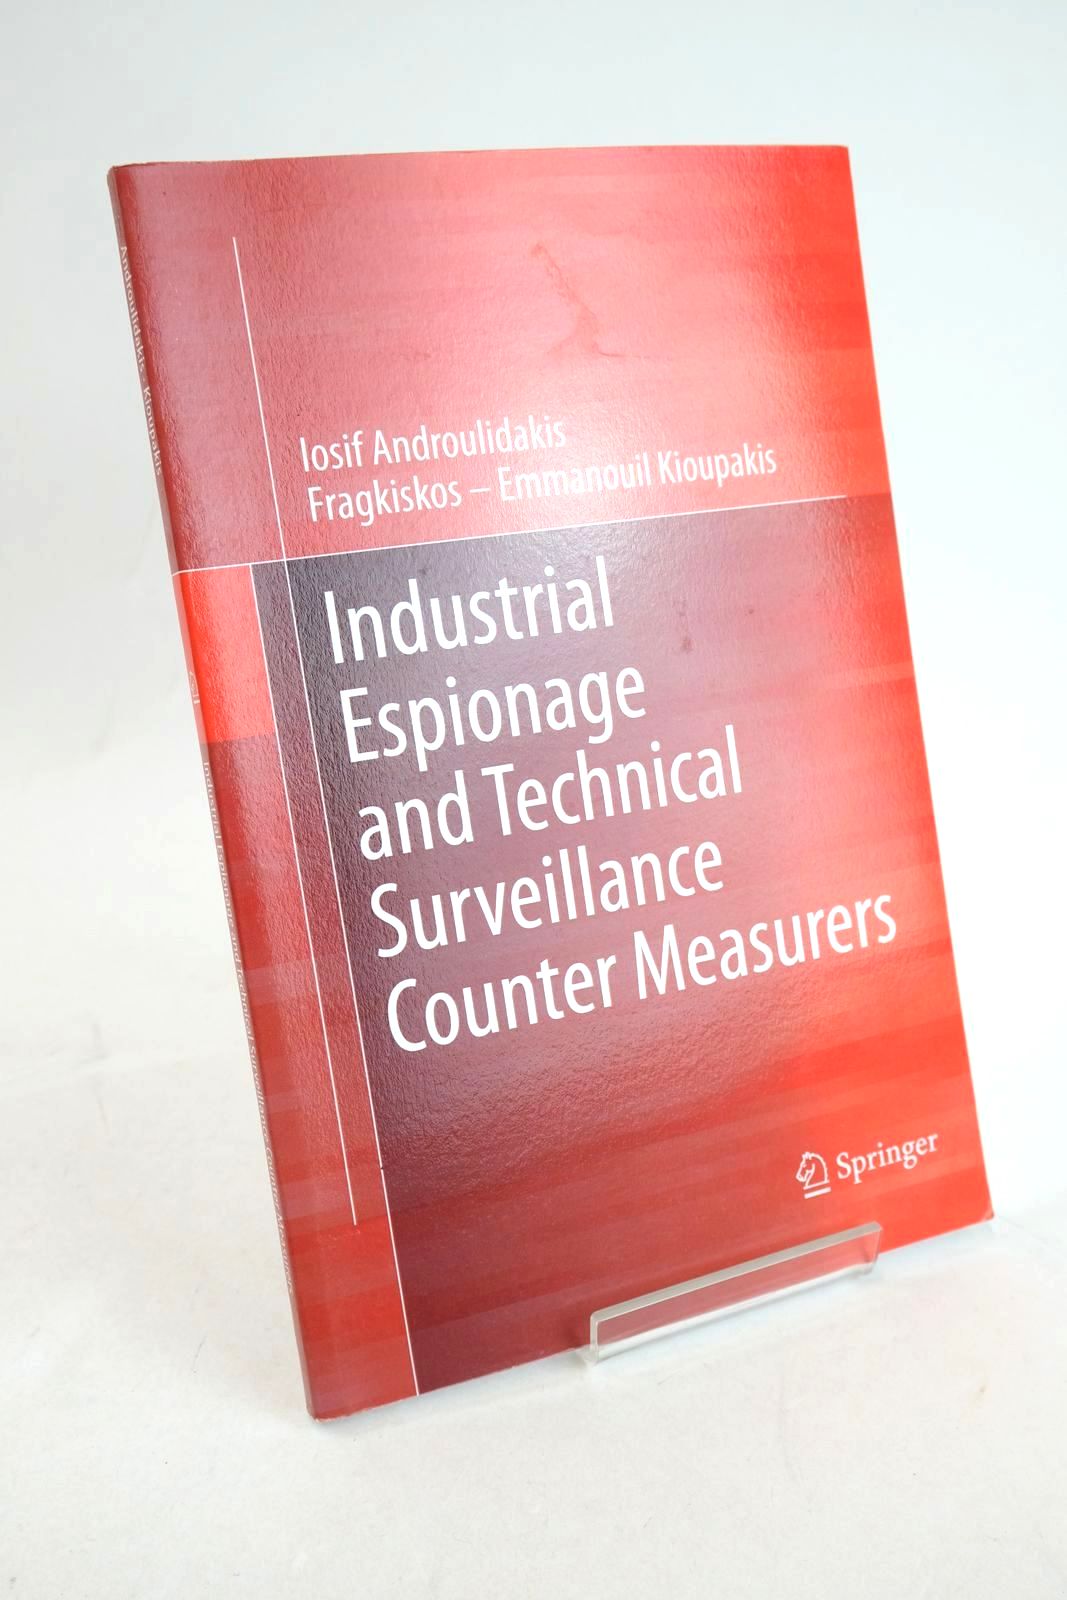 Photo of INDUSTRIAL ESPIONAGE AND TECHNICAL SURVEILLANCE COUNTER MEASURERS written by Androulidakis, Losif Kioupakis, Fragkiskos-Emmanouil published by Springer (STOCK CODE: 1327424)  for sale by Stella & Rose's Books